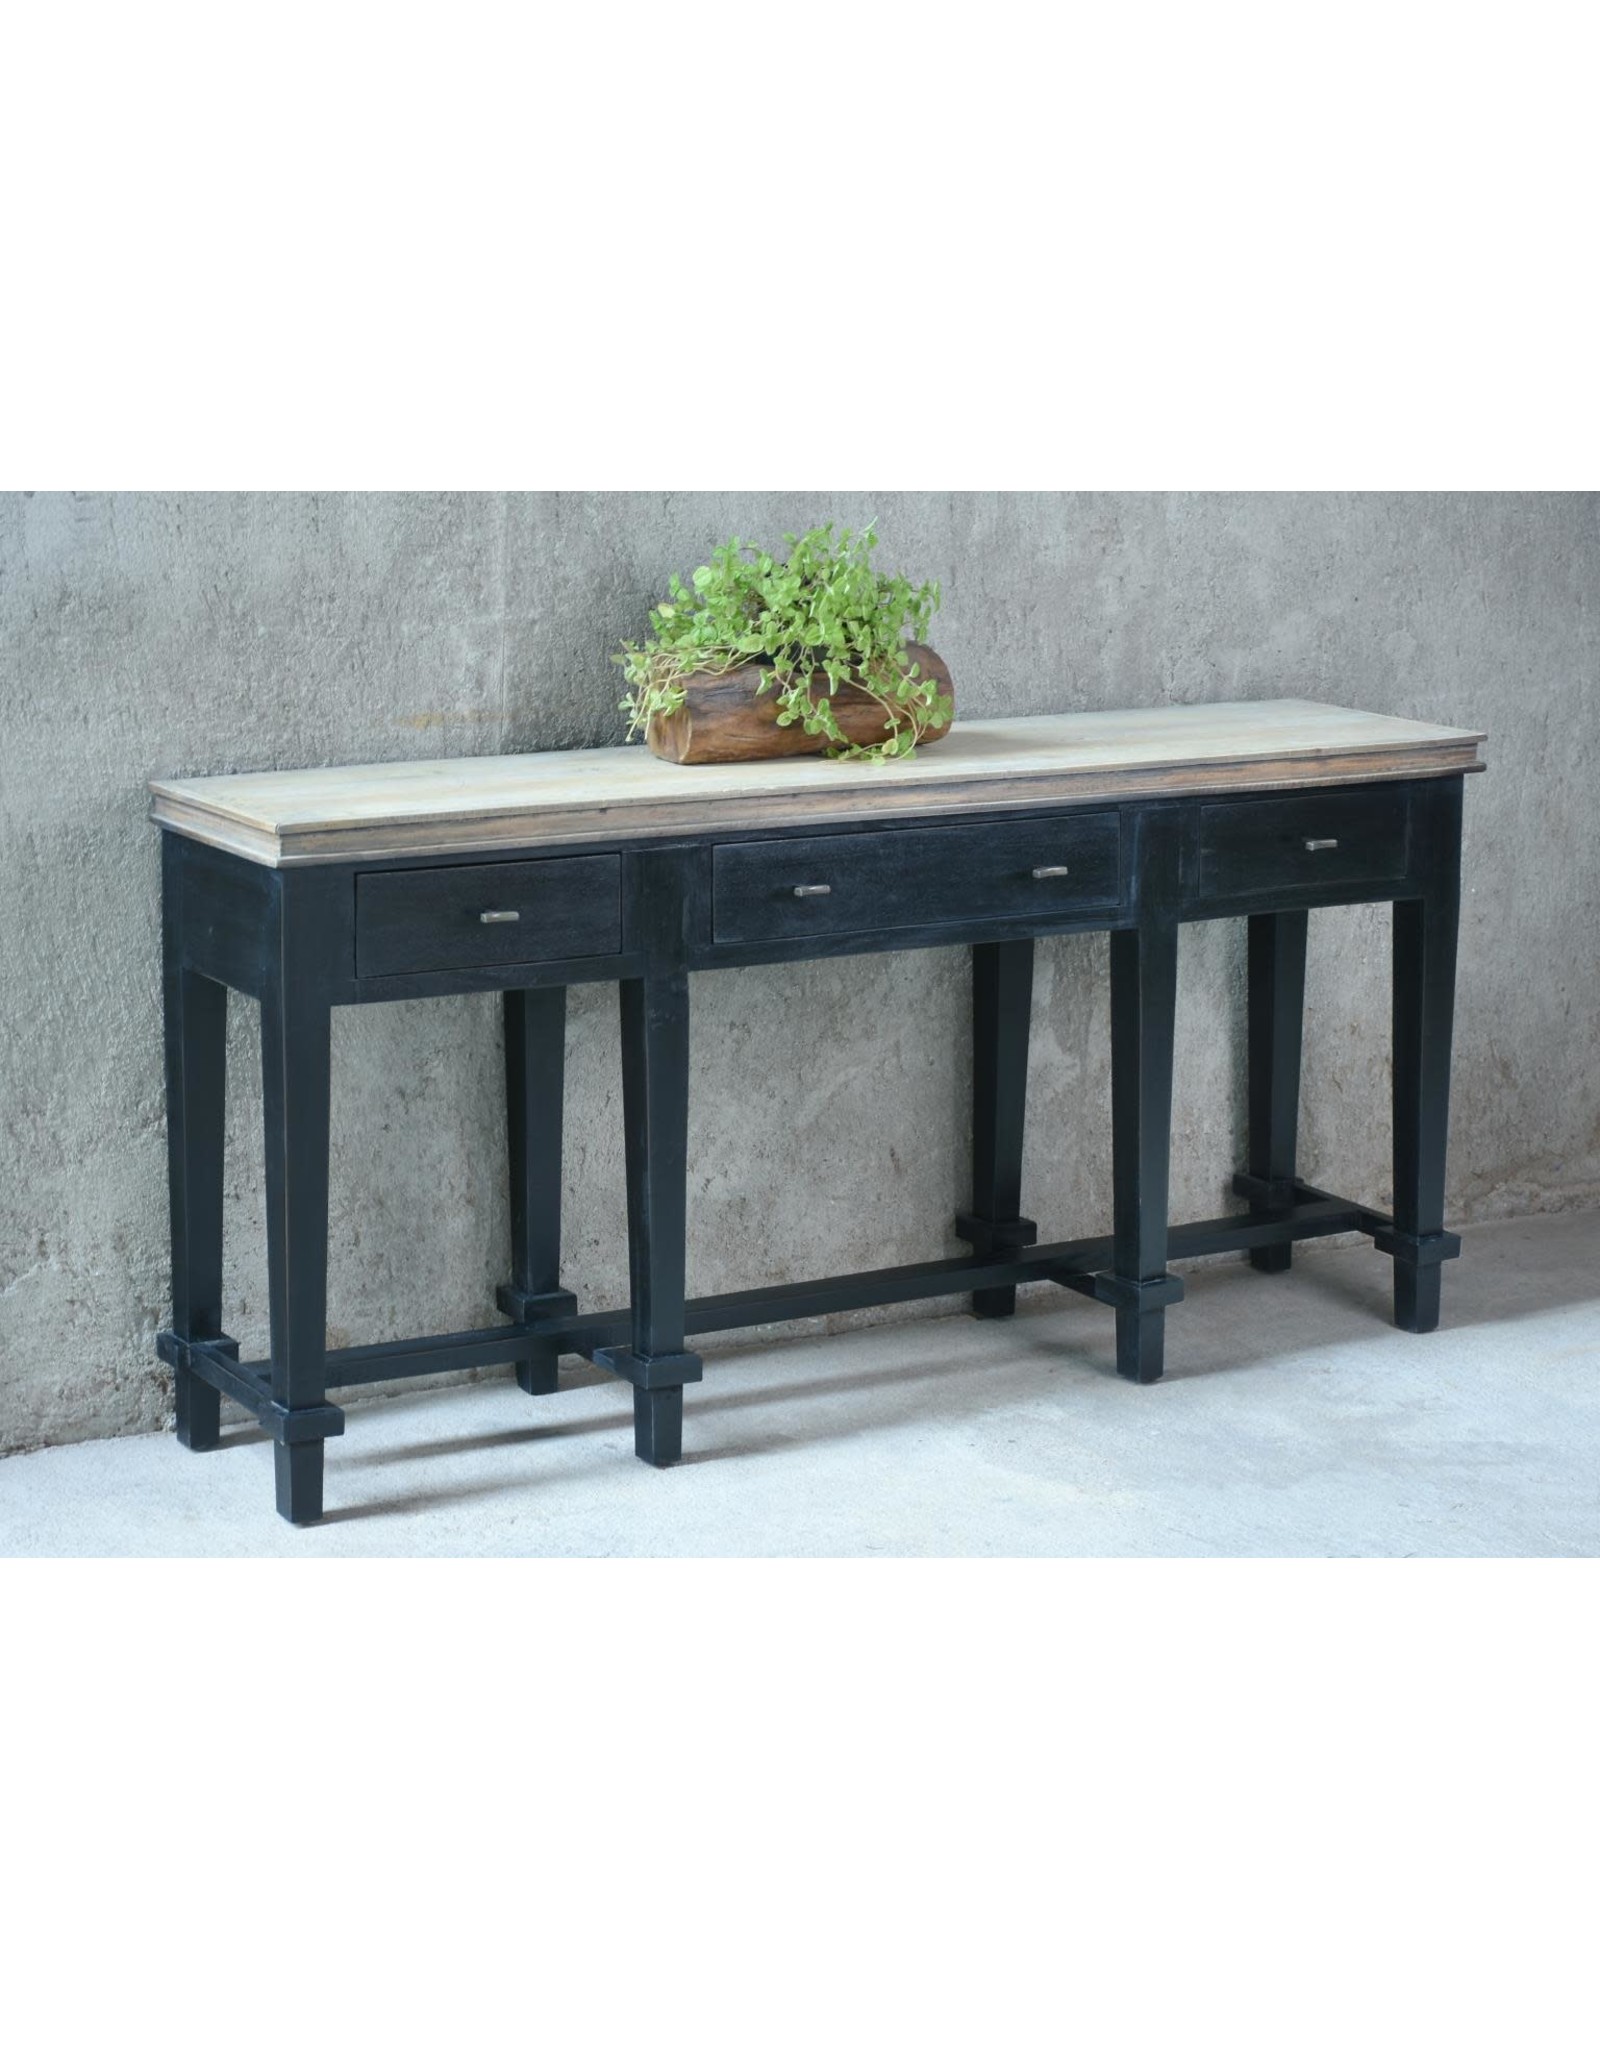 TAB359 Console Table 3DRW 68.1x14.1x31.8"H